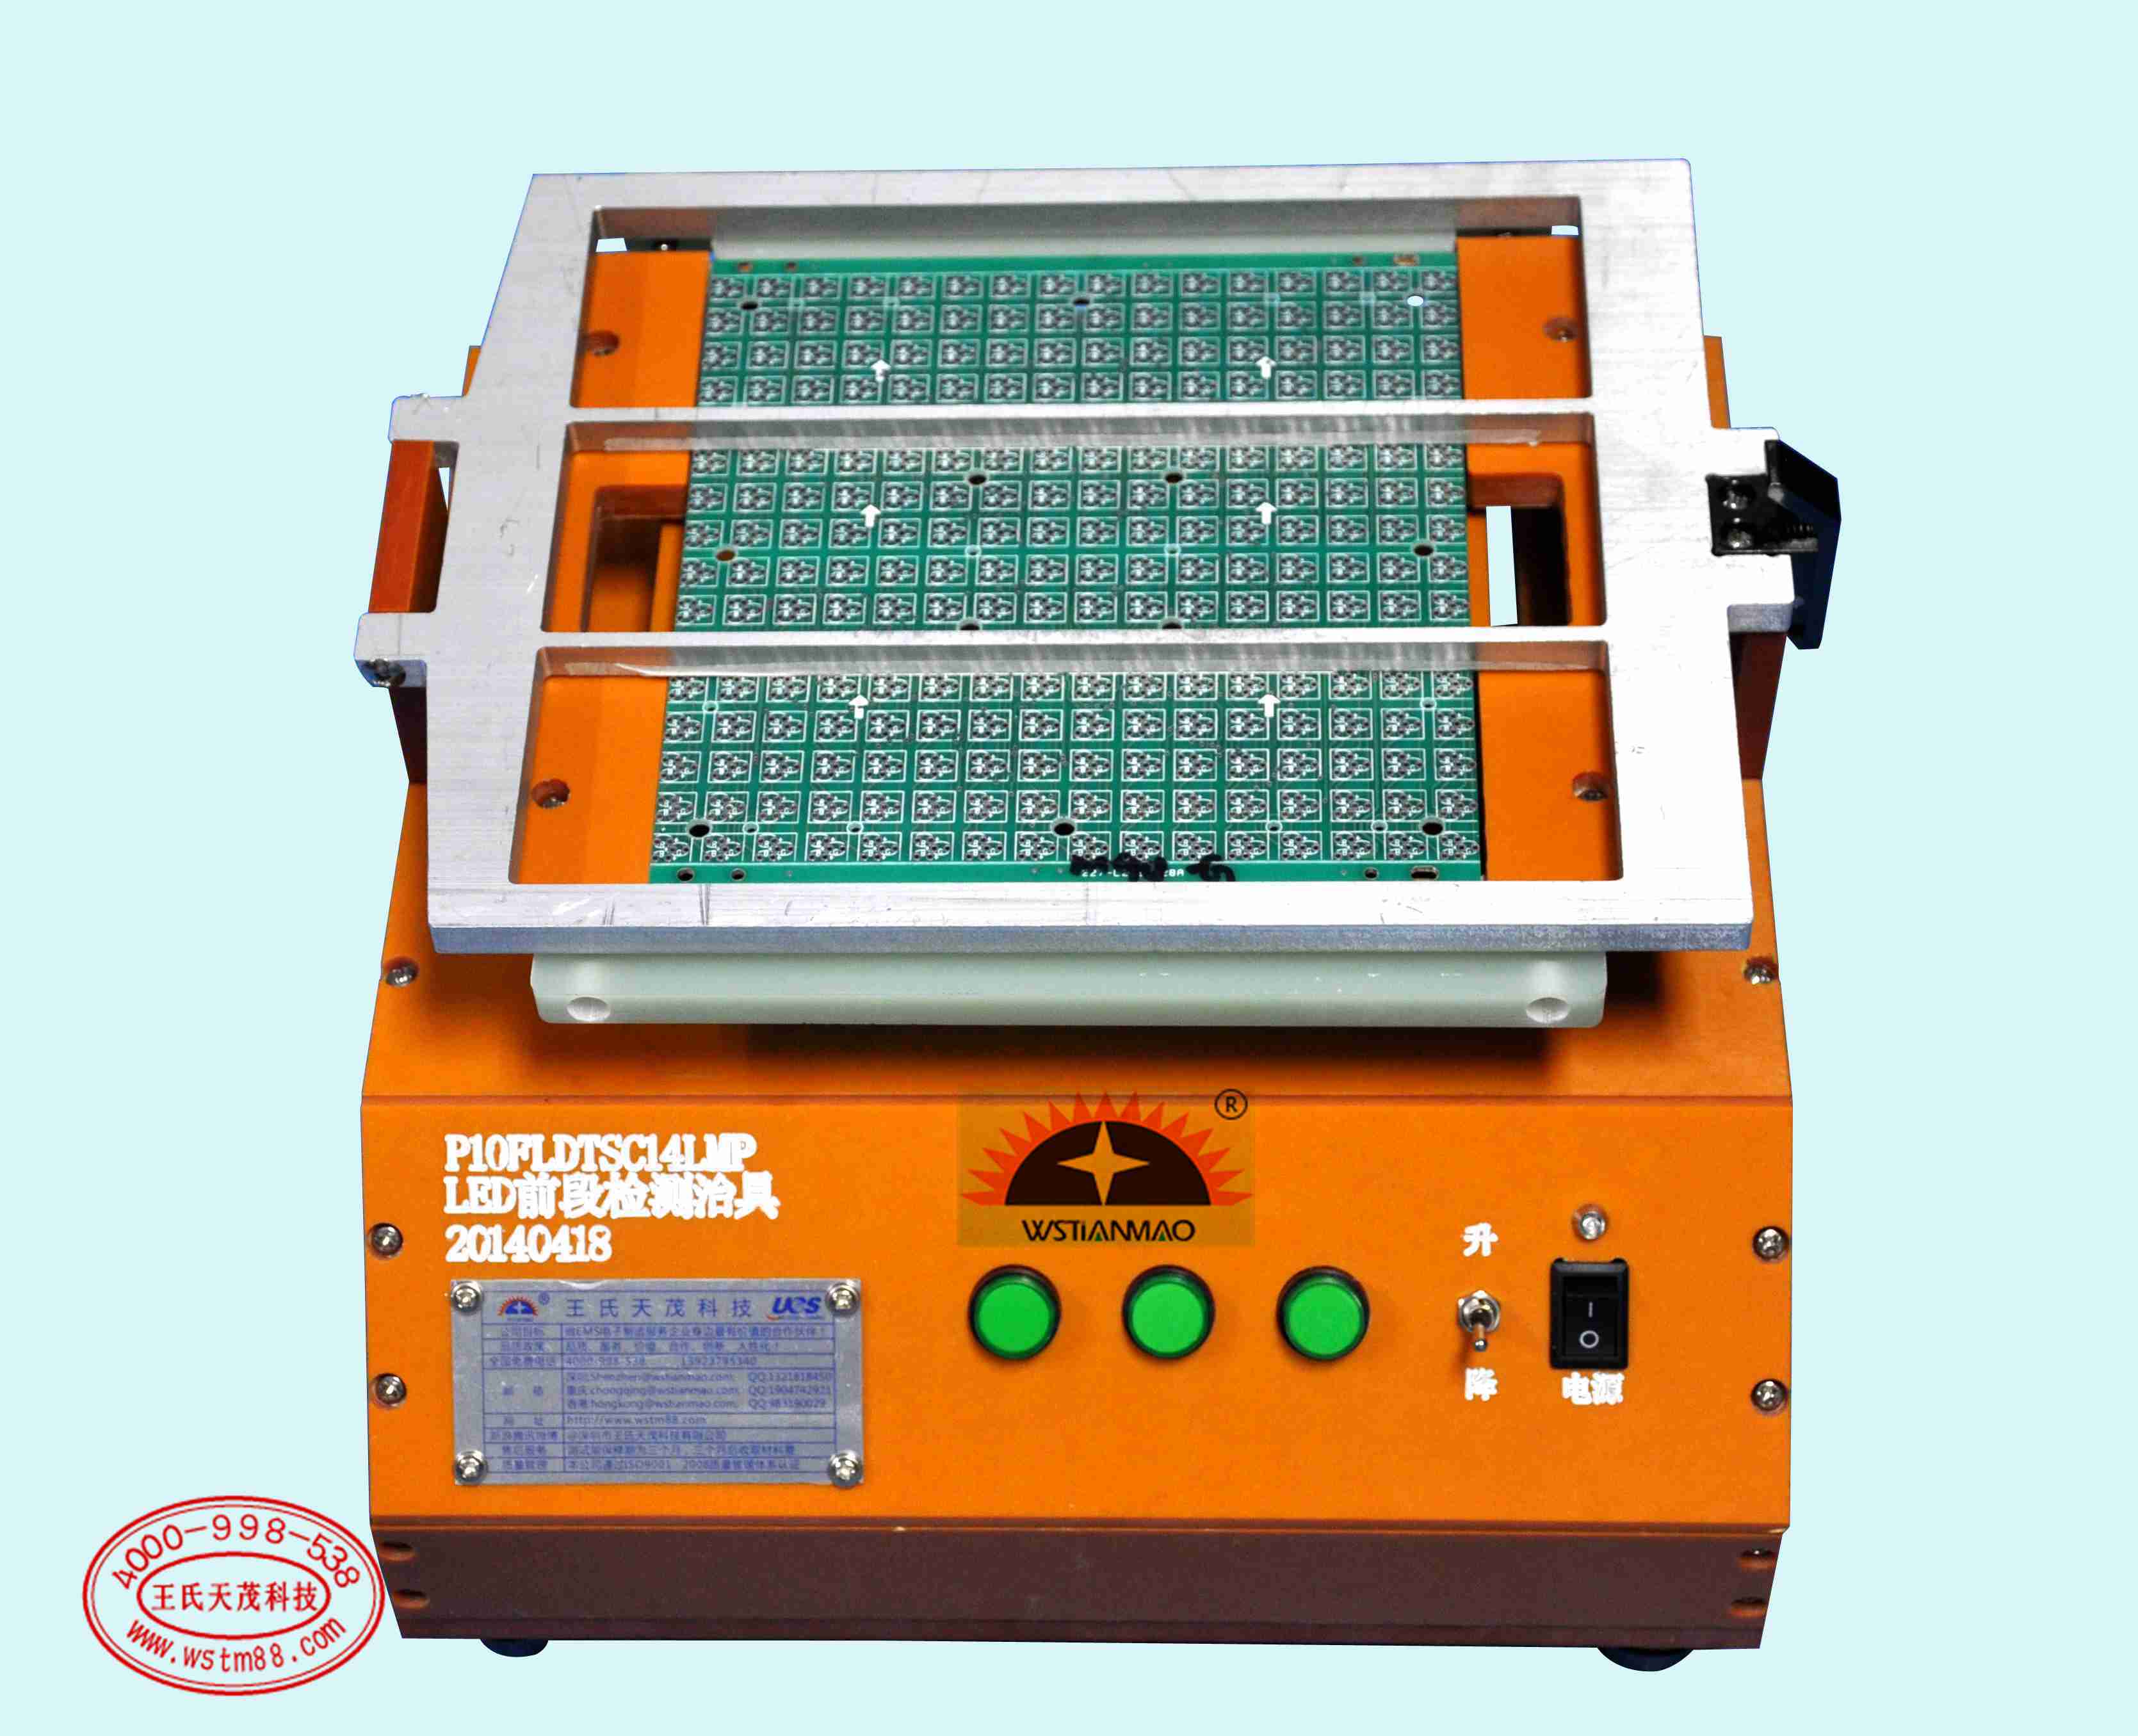 LED polarity function test fixture of led display